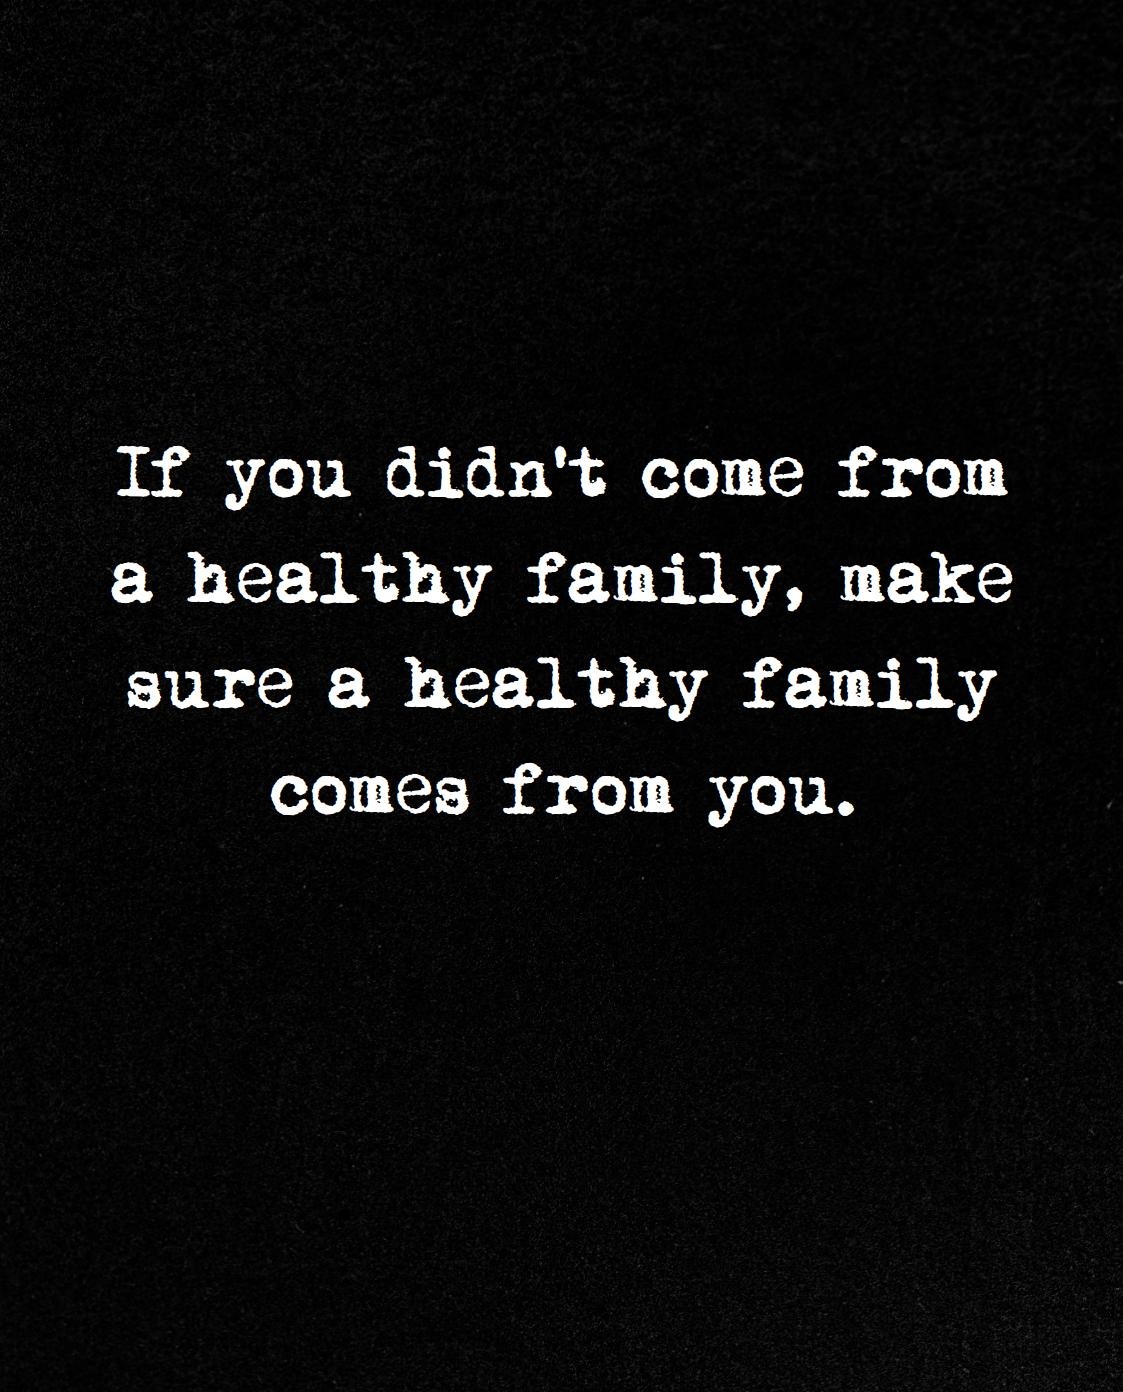 If you didn't come from a healthy family, make sure a healthy family comes from you